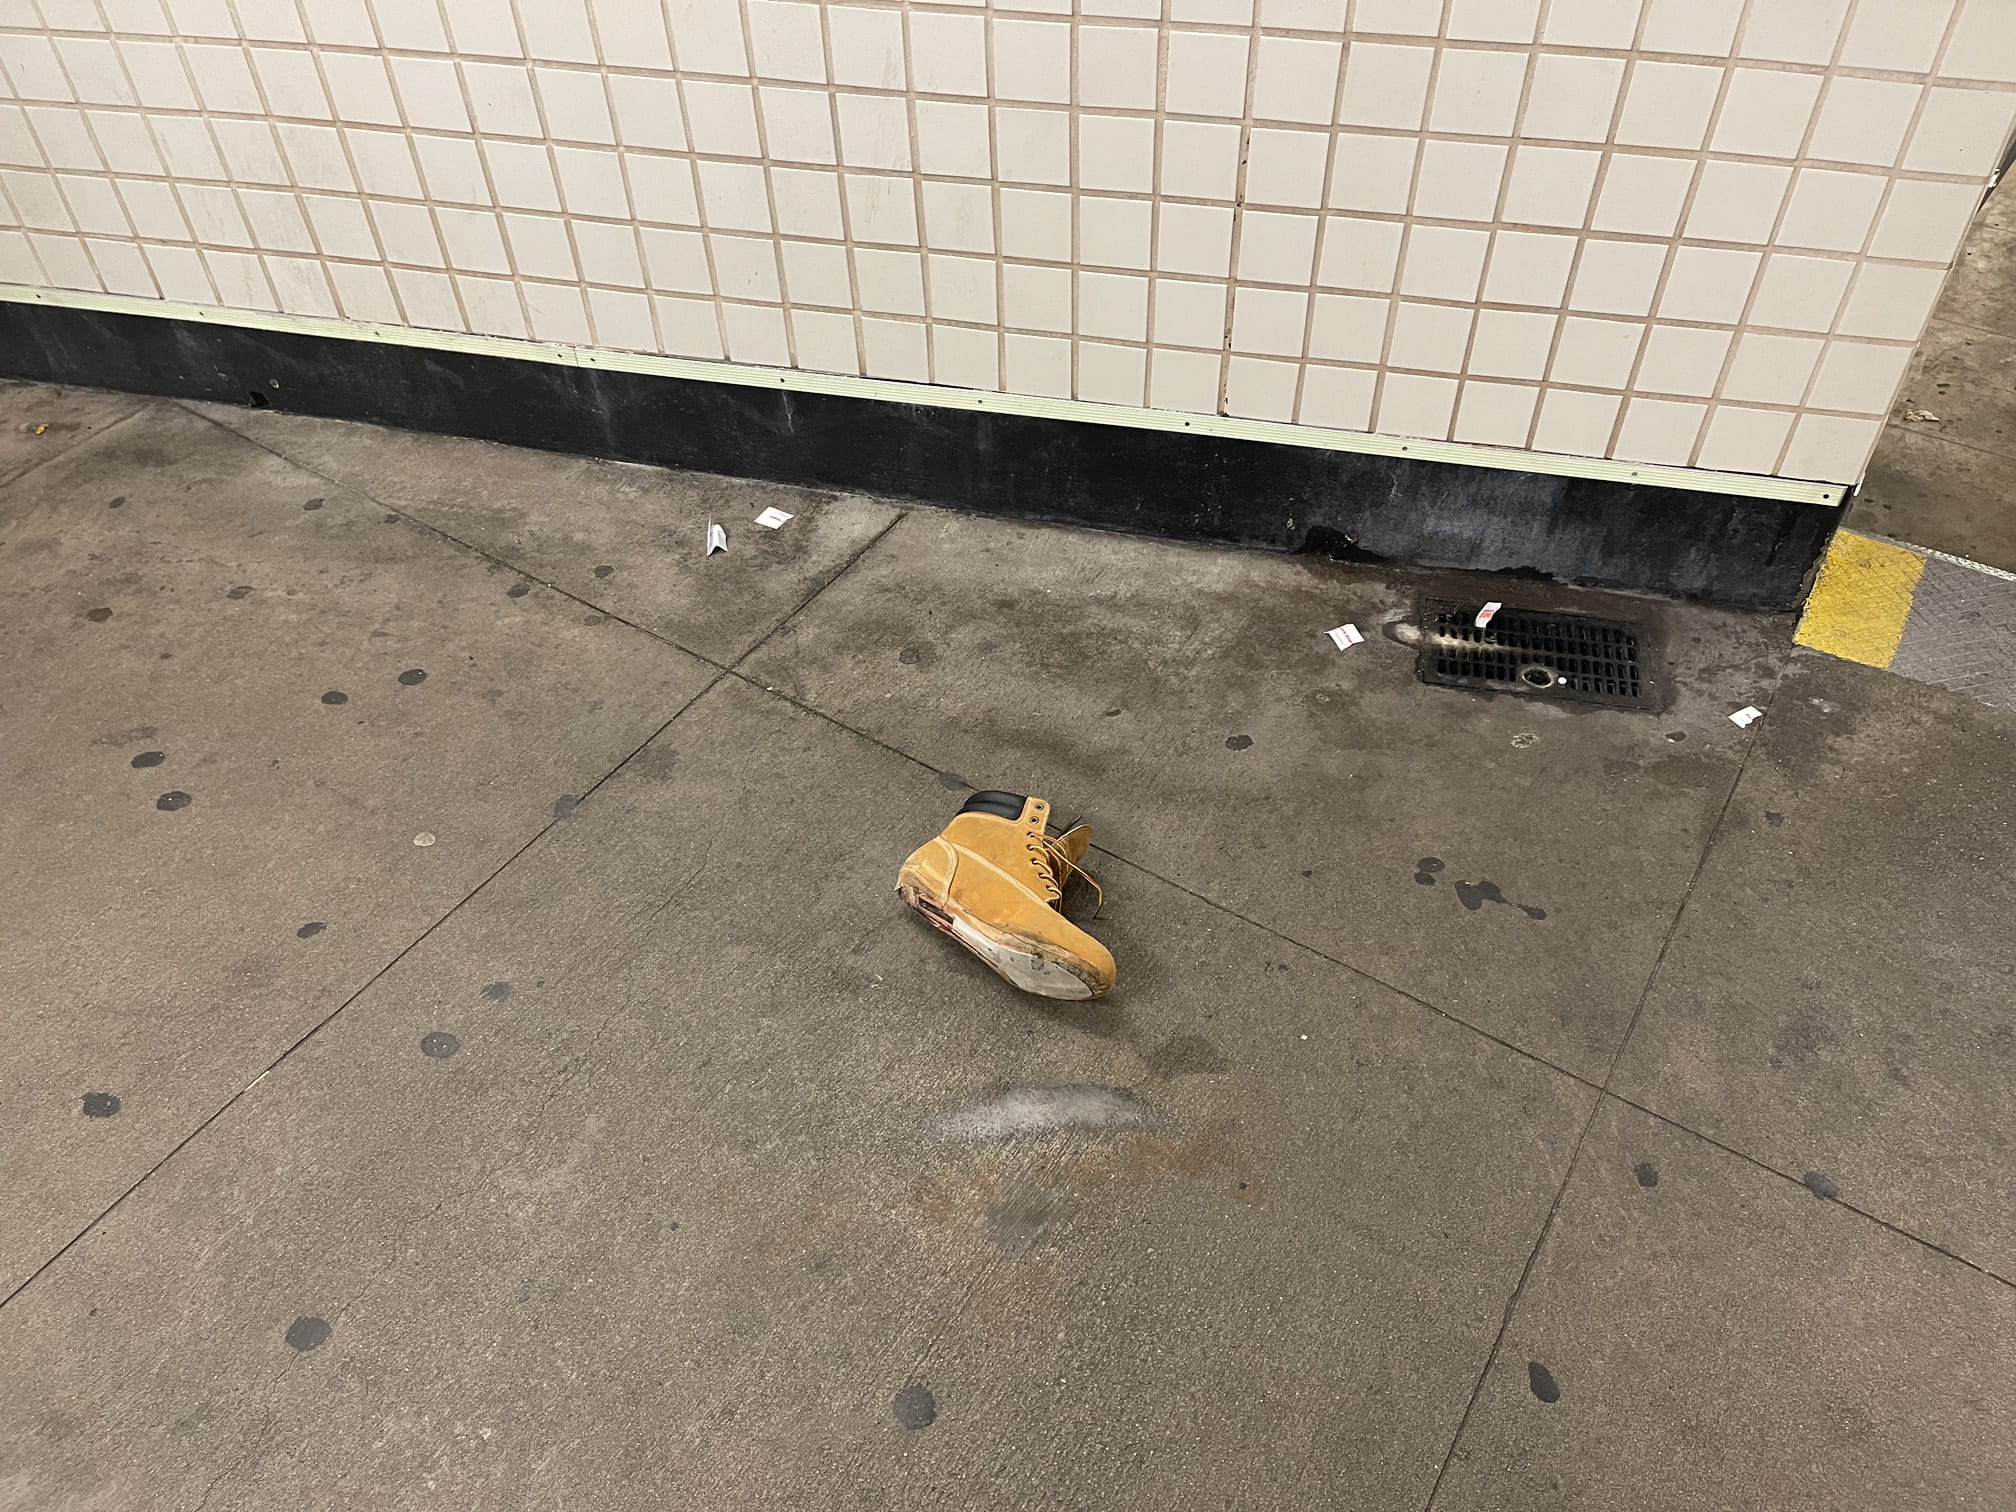 A lone soleless timb at 168th st station in washington heights